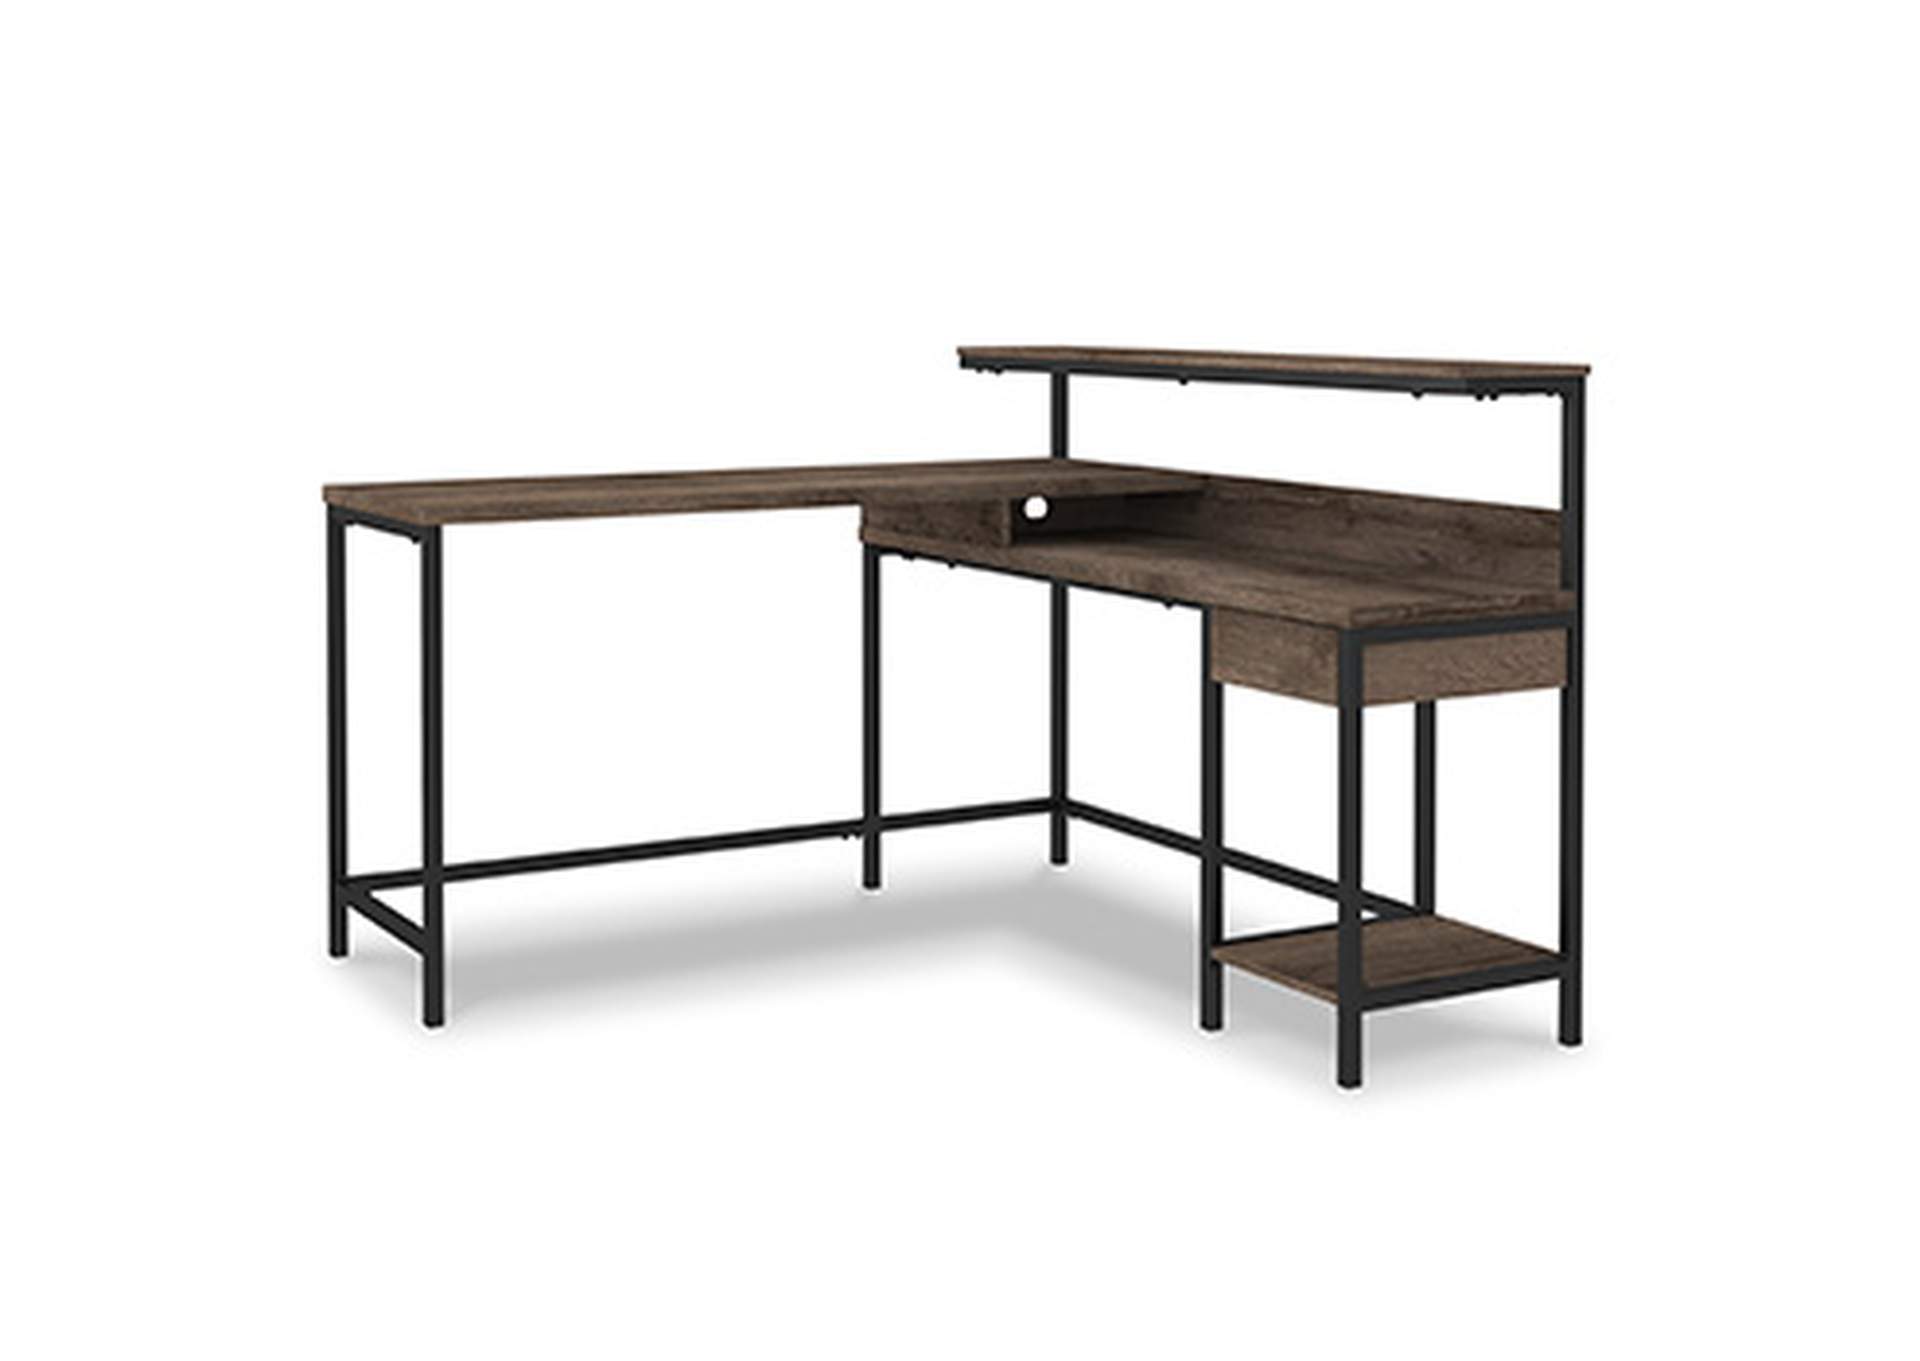 Arlenbry Home Office L-Desk with Storage,Signature Design By Ashley